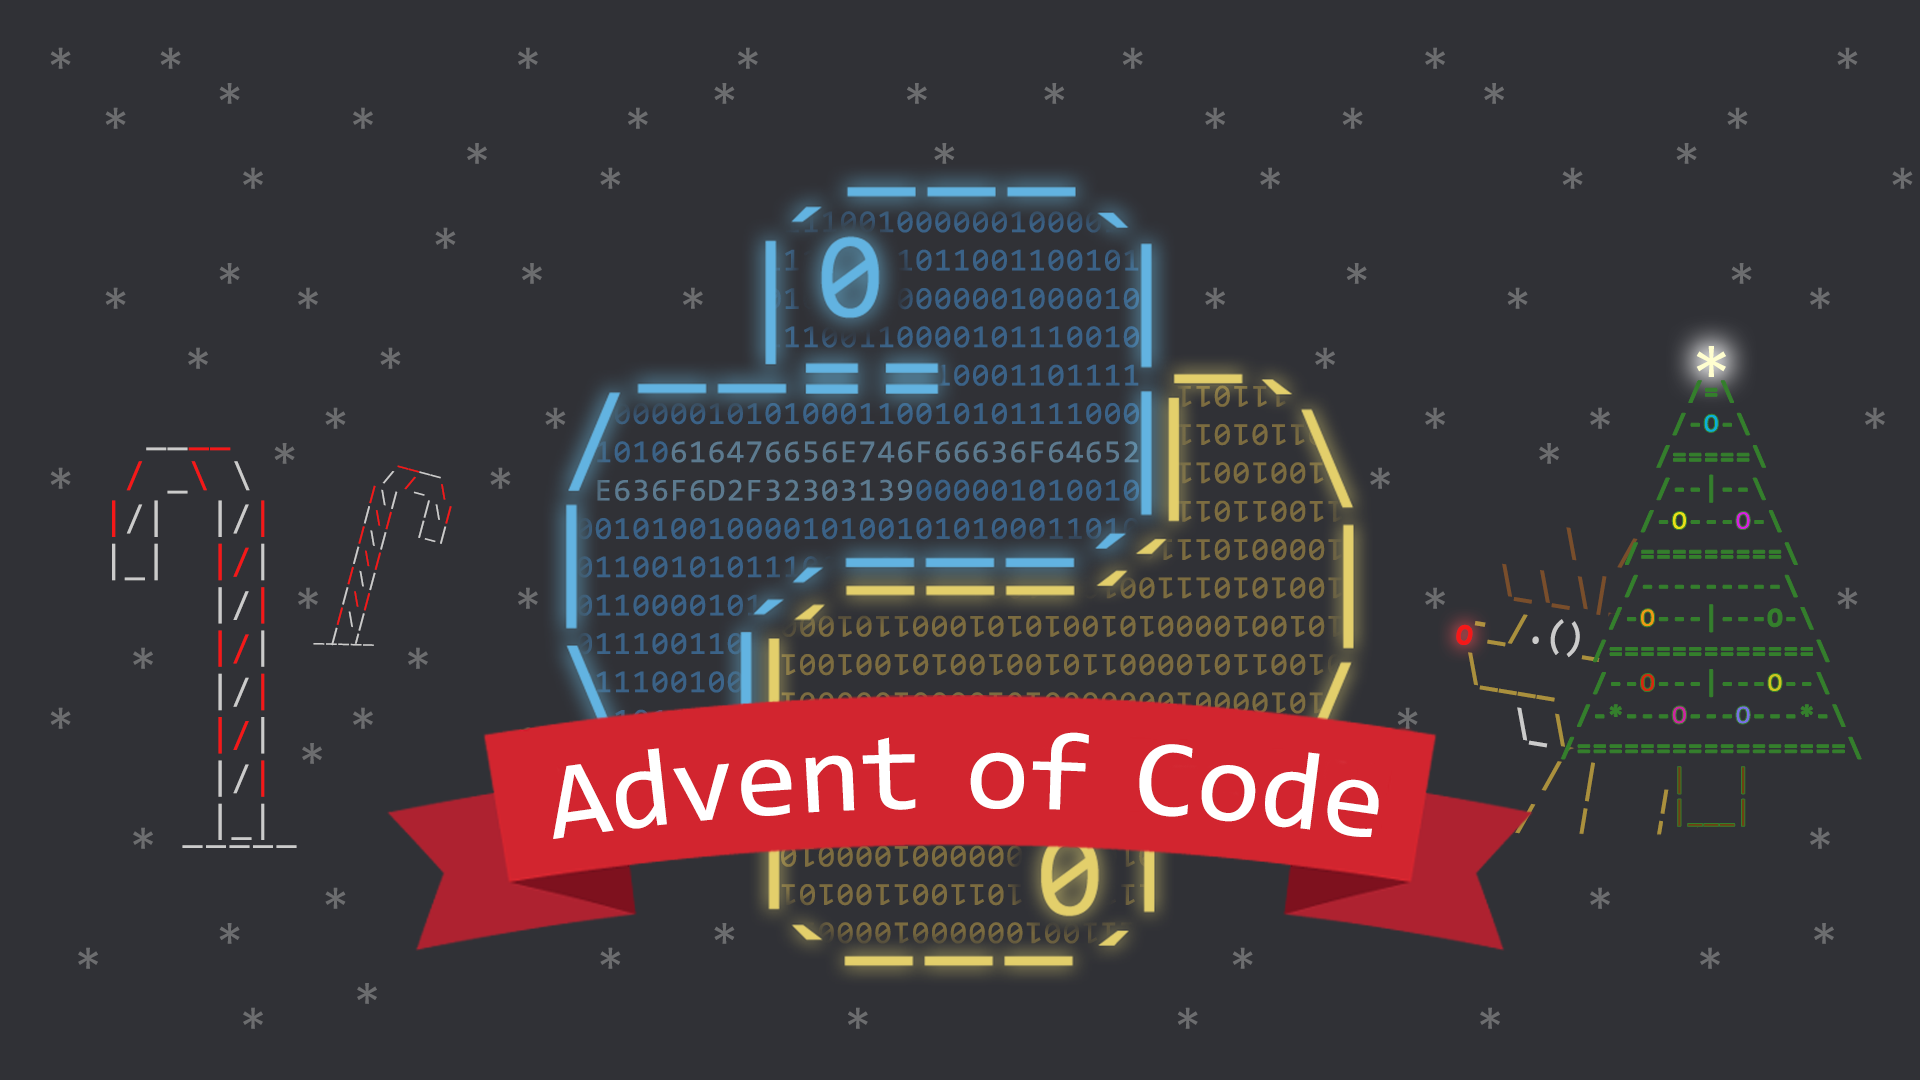 Advent of Code from a community event organizer's perspective